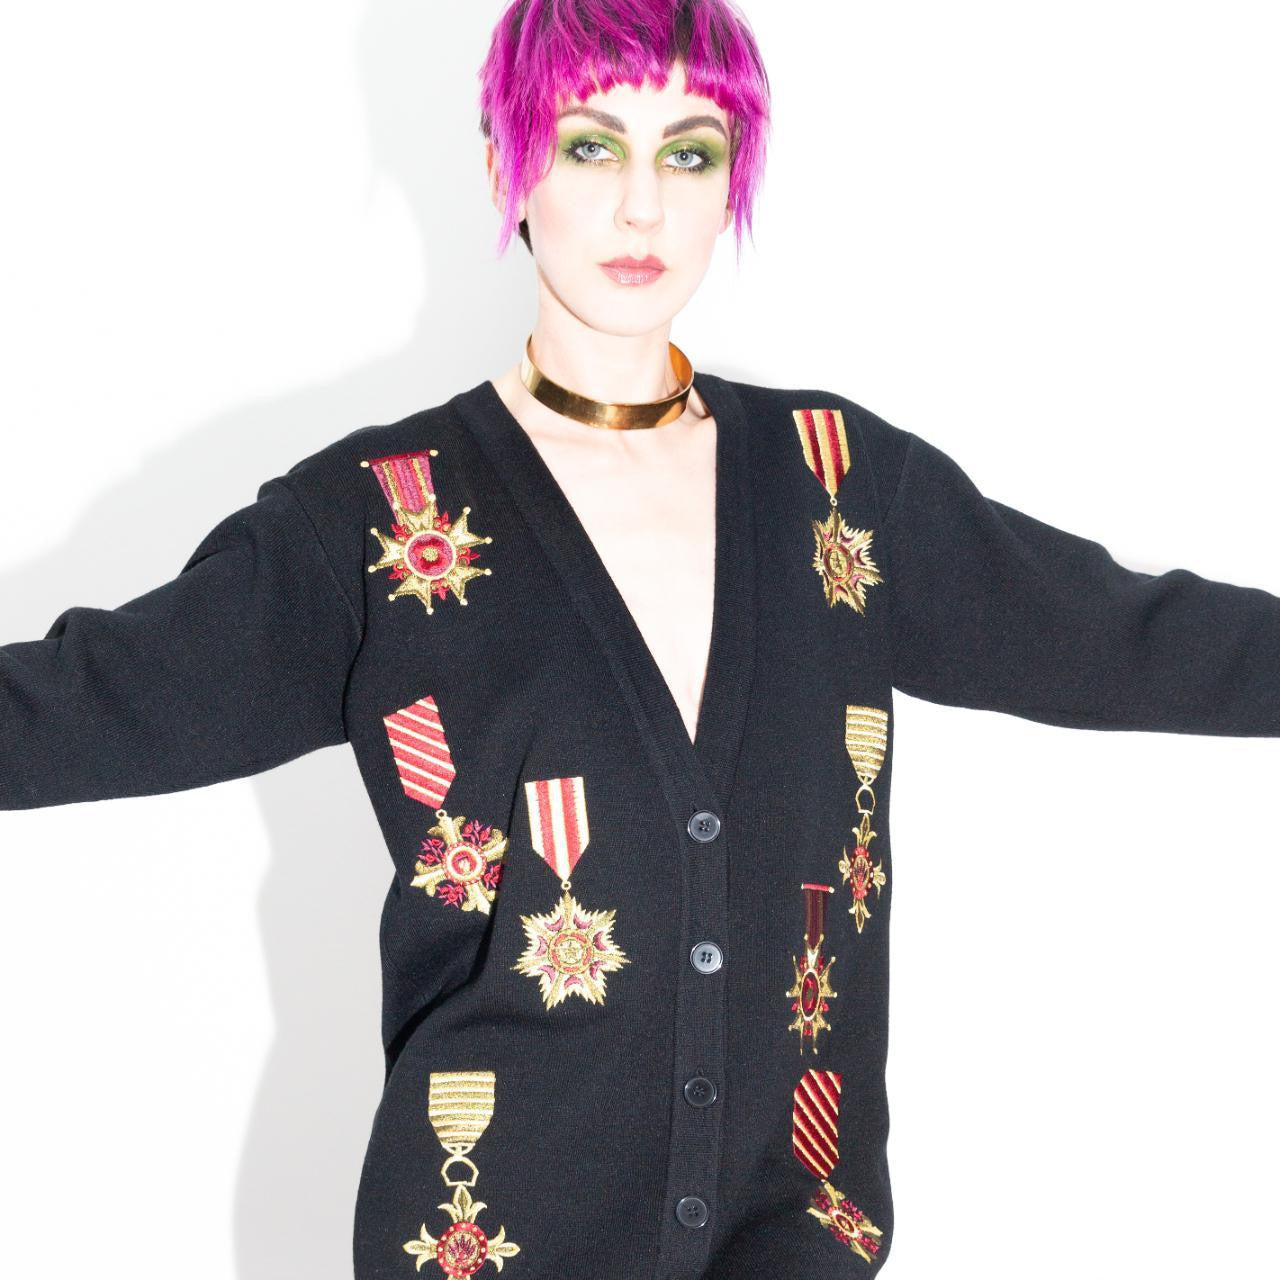 Vintage 90s Black Cardigan Sweater with Medals